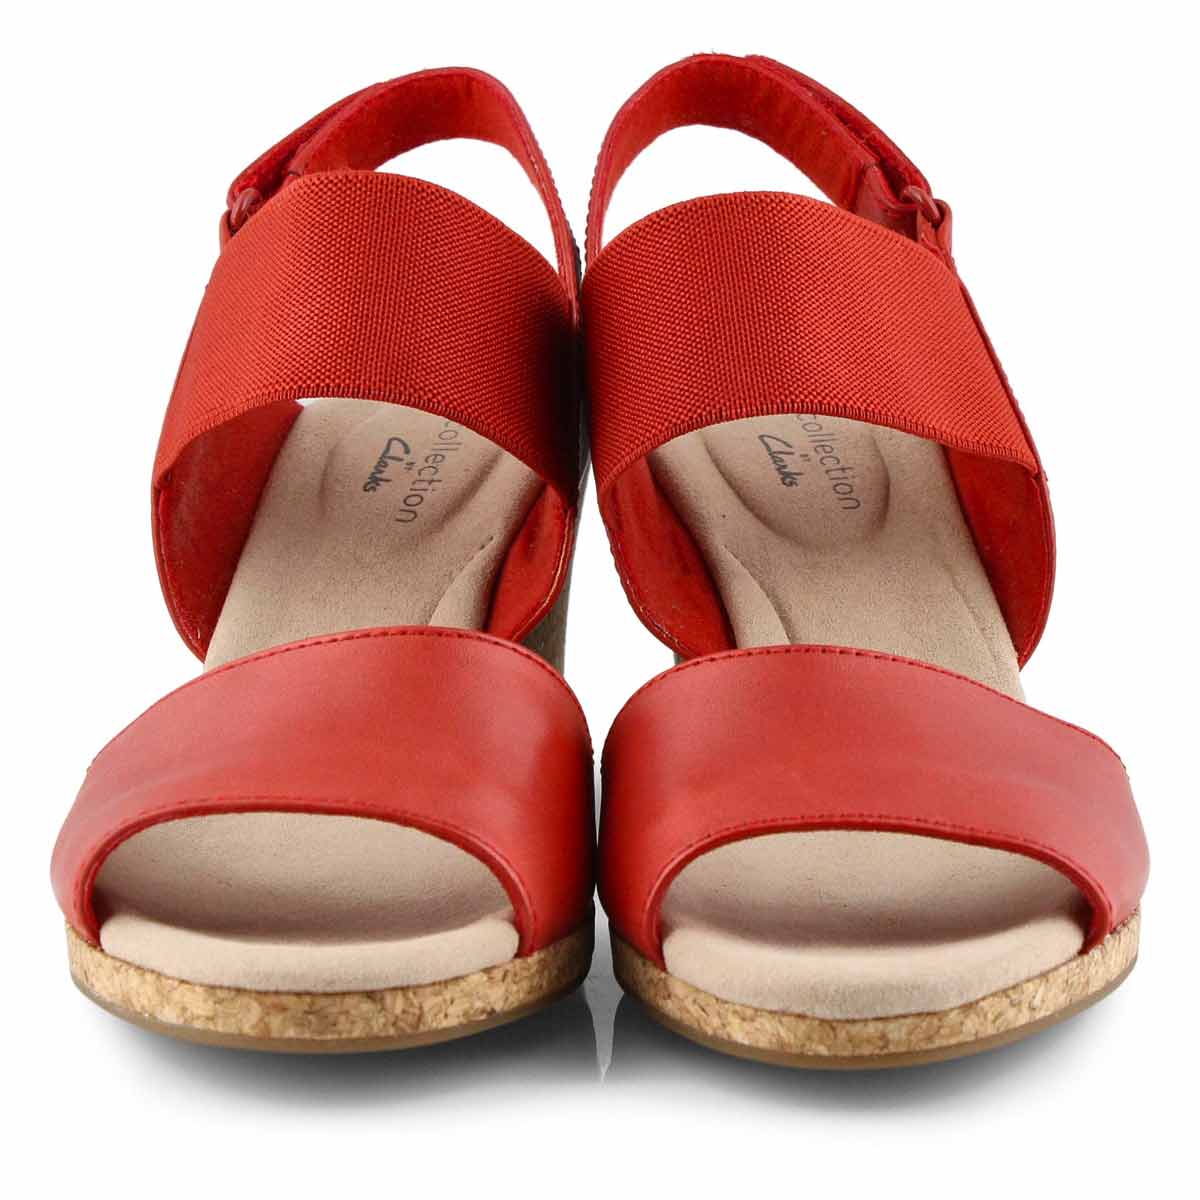 Clarks Women's LAFLEY LILY red wedge sandals | SoftMoc.com